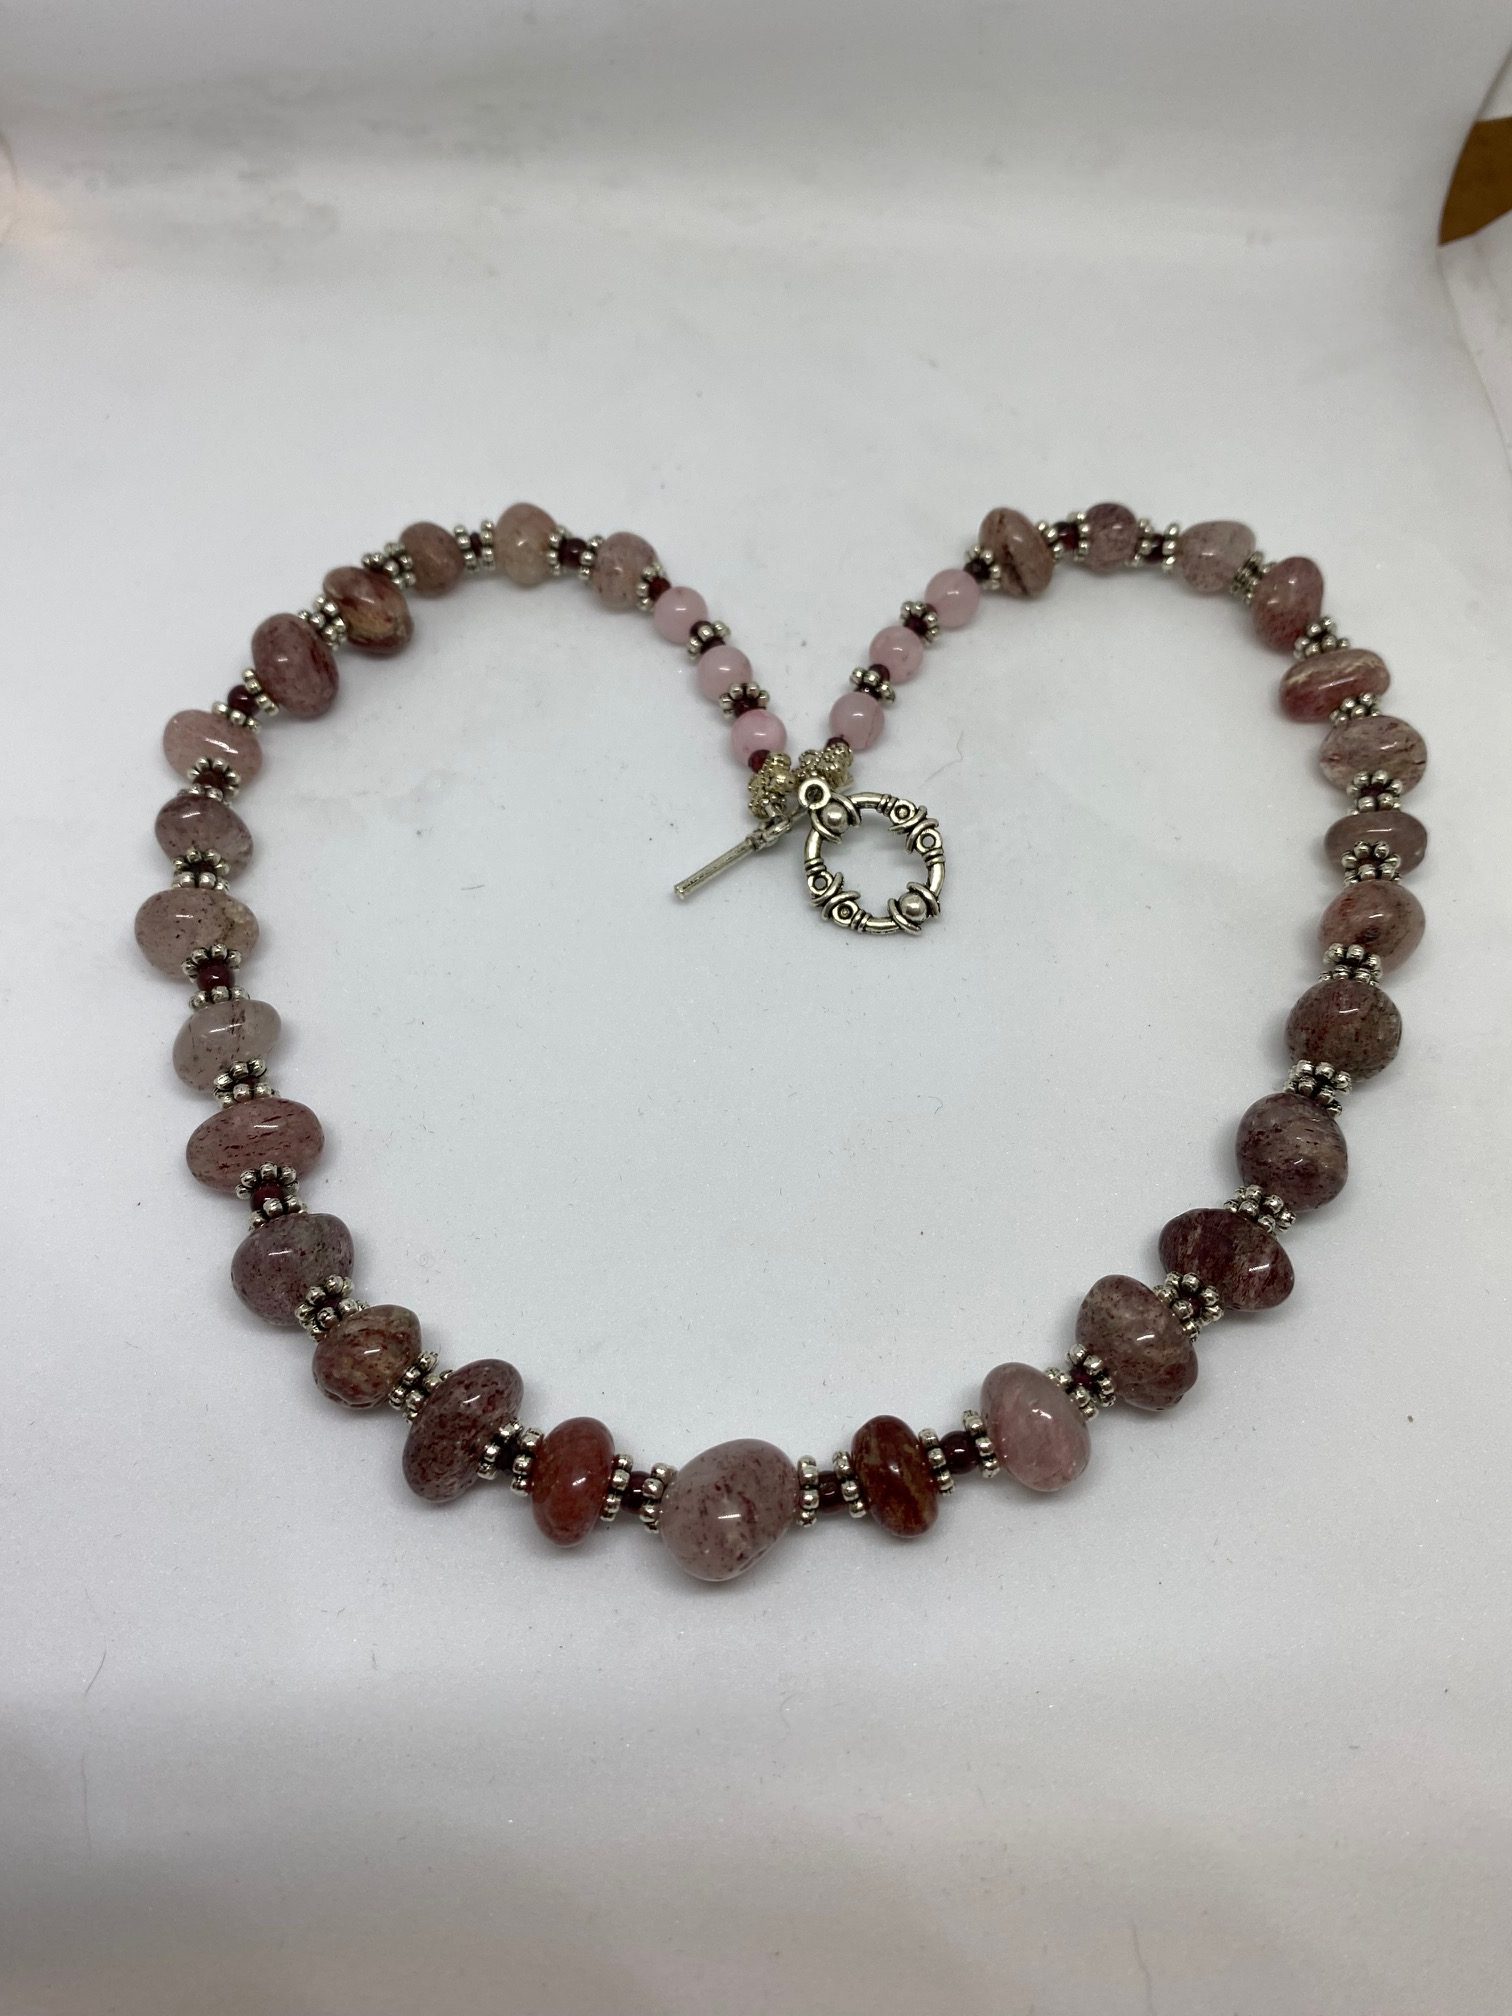 Strawberry Quartz and Pink Tourmaline Necklace Promotes Heart Opening and Heart Healing